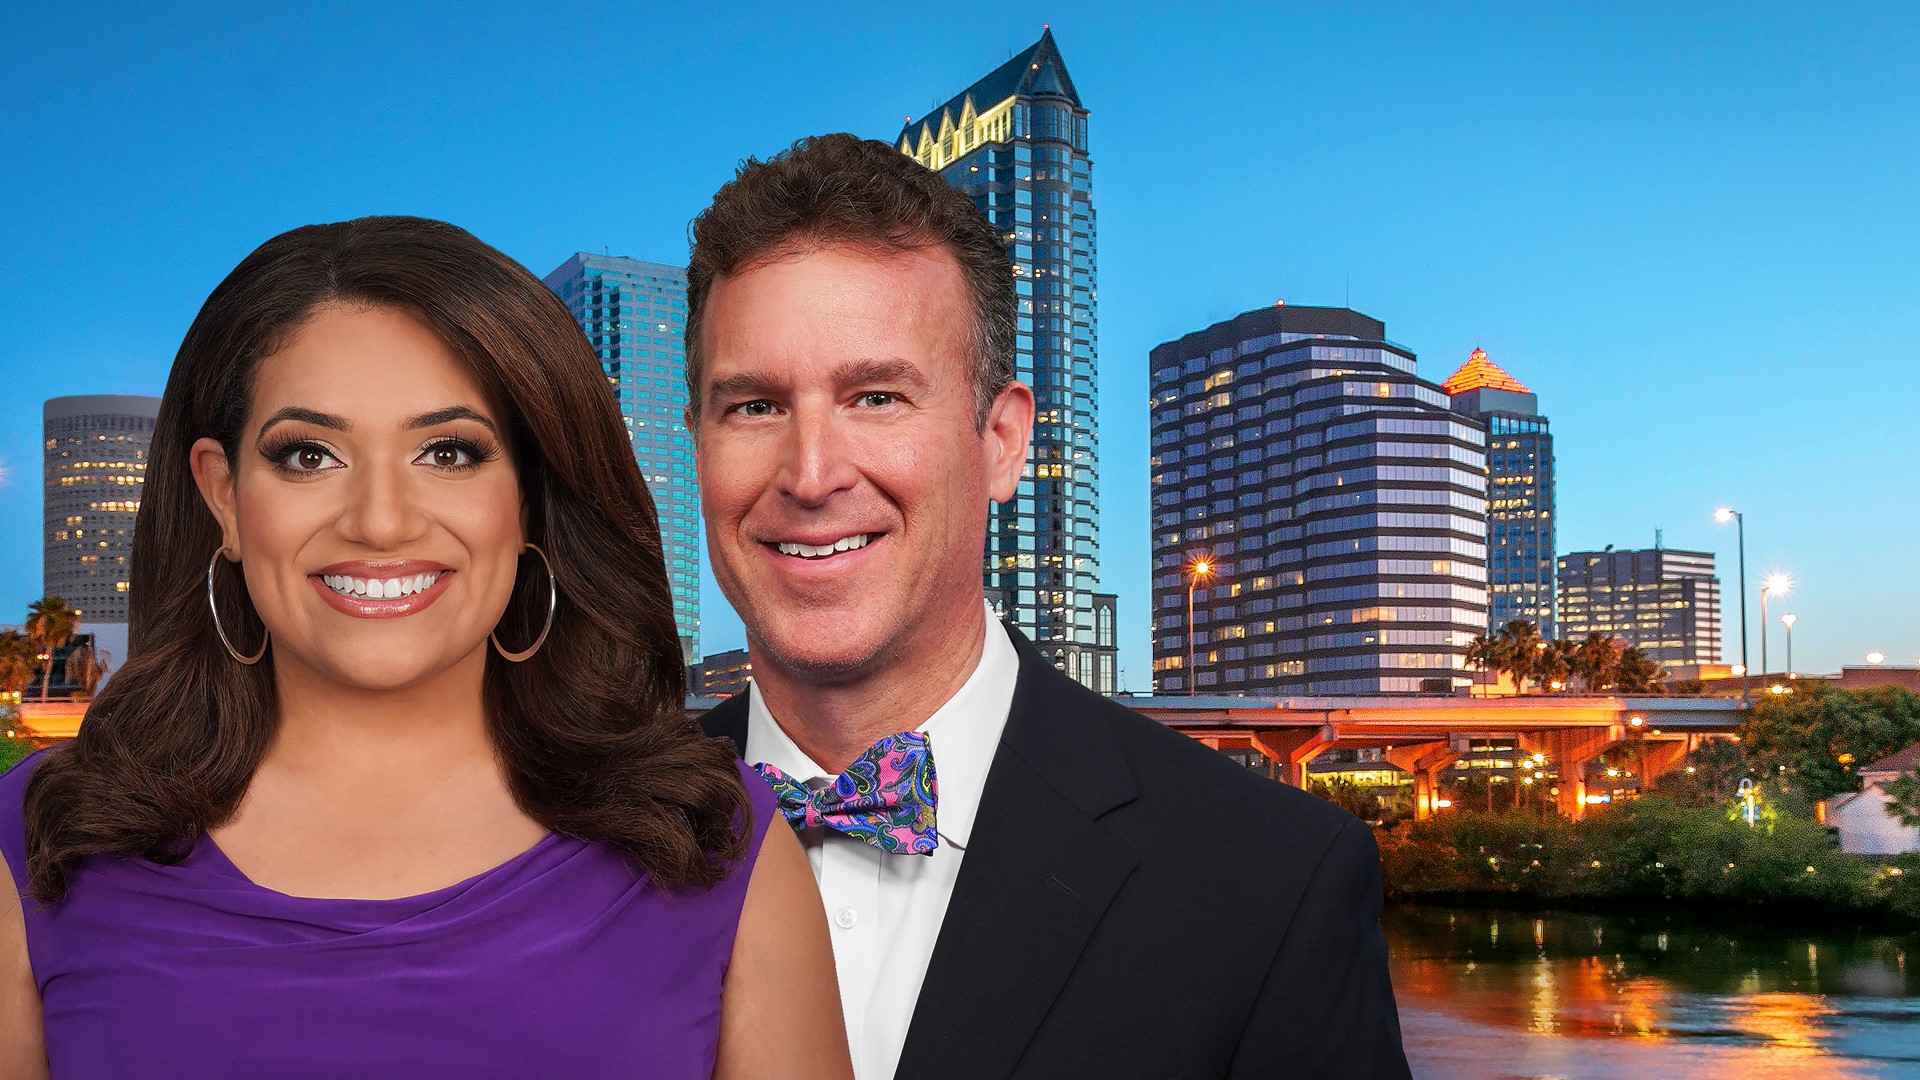 The AM crew gets your morning started off right, offering breaking news from overnight and a full forecast to plan your weekend around the Tampa Bay region.